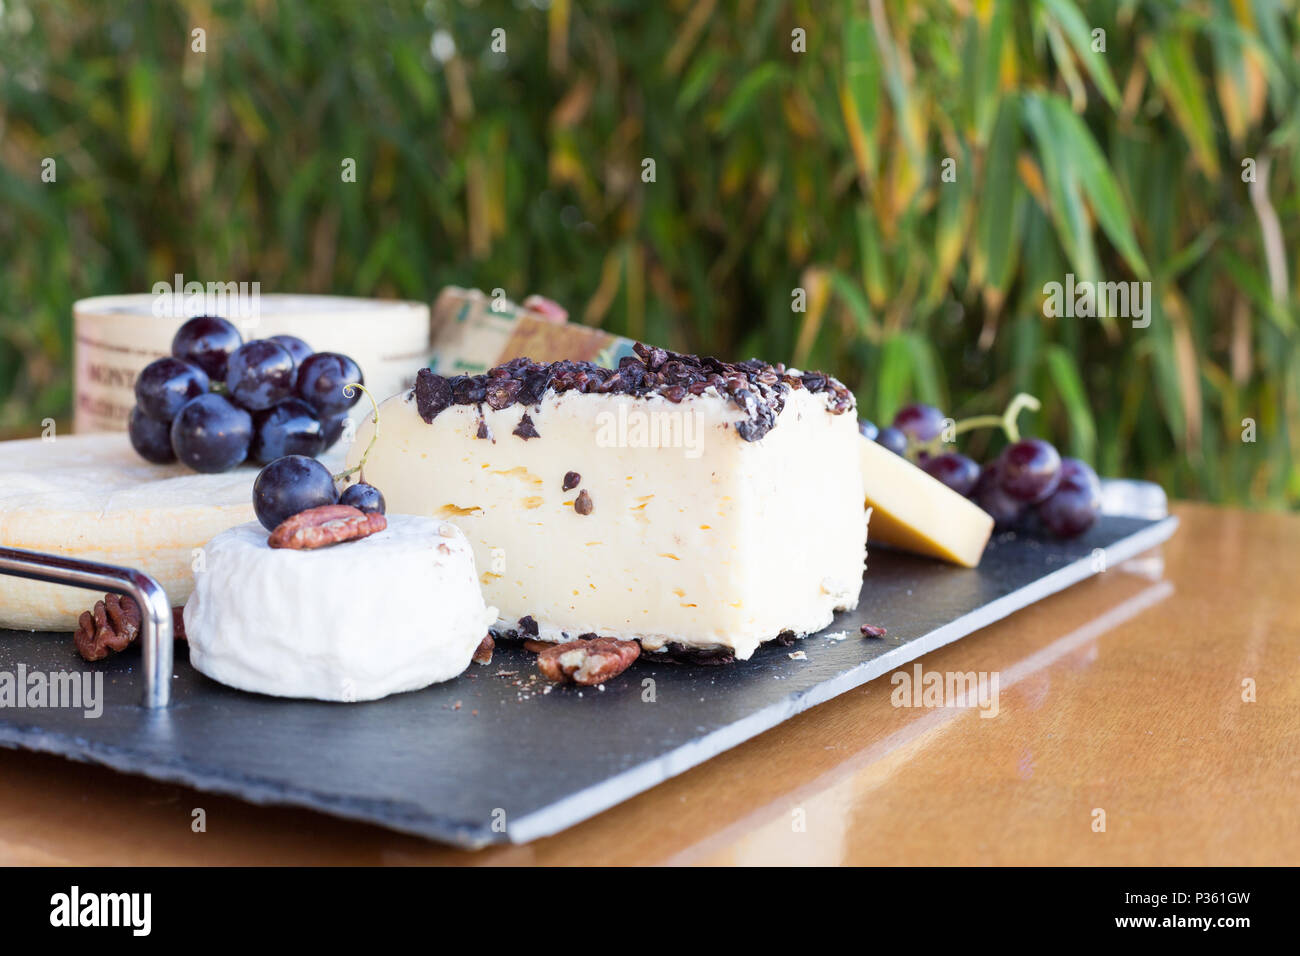 A platter with various cheeses like Gruyère, goat cheese decorated with grapes and nuts. These foods are eaten for dessert or after a hearty meal. Stock Photo